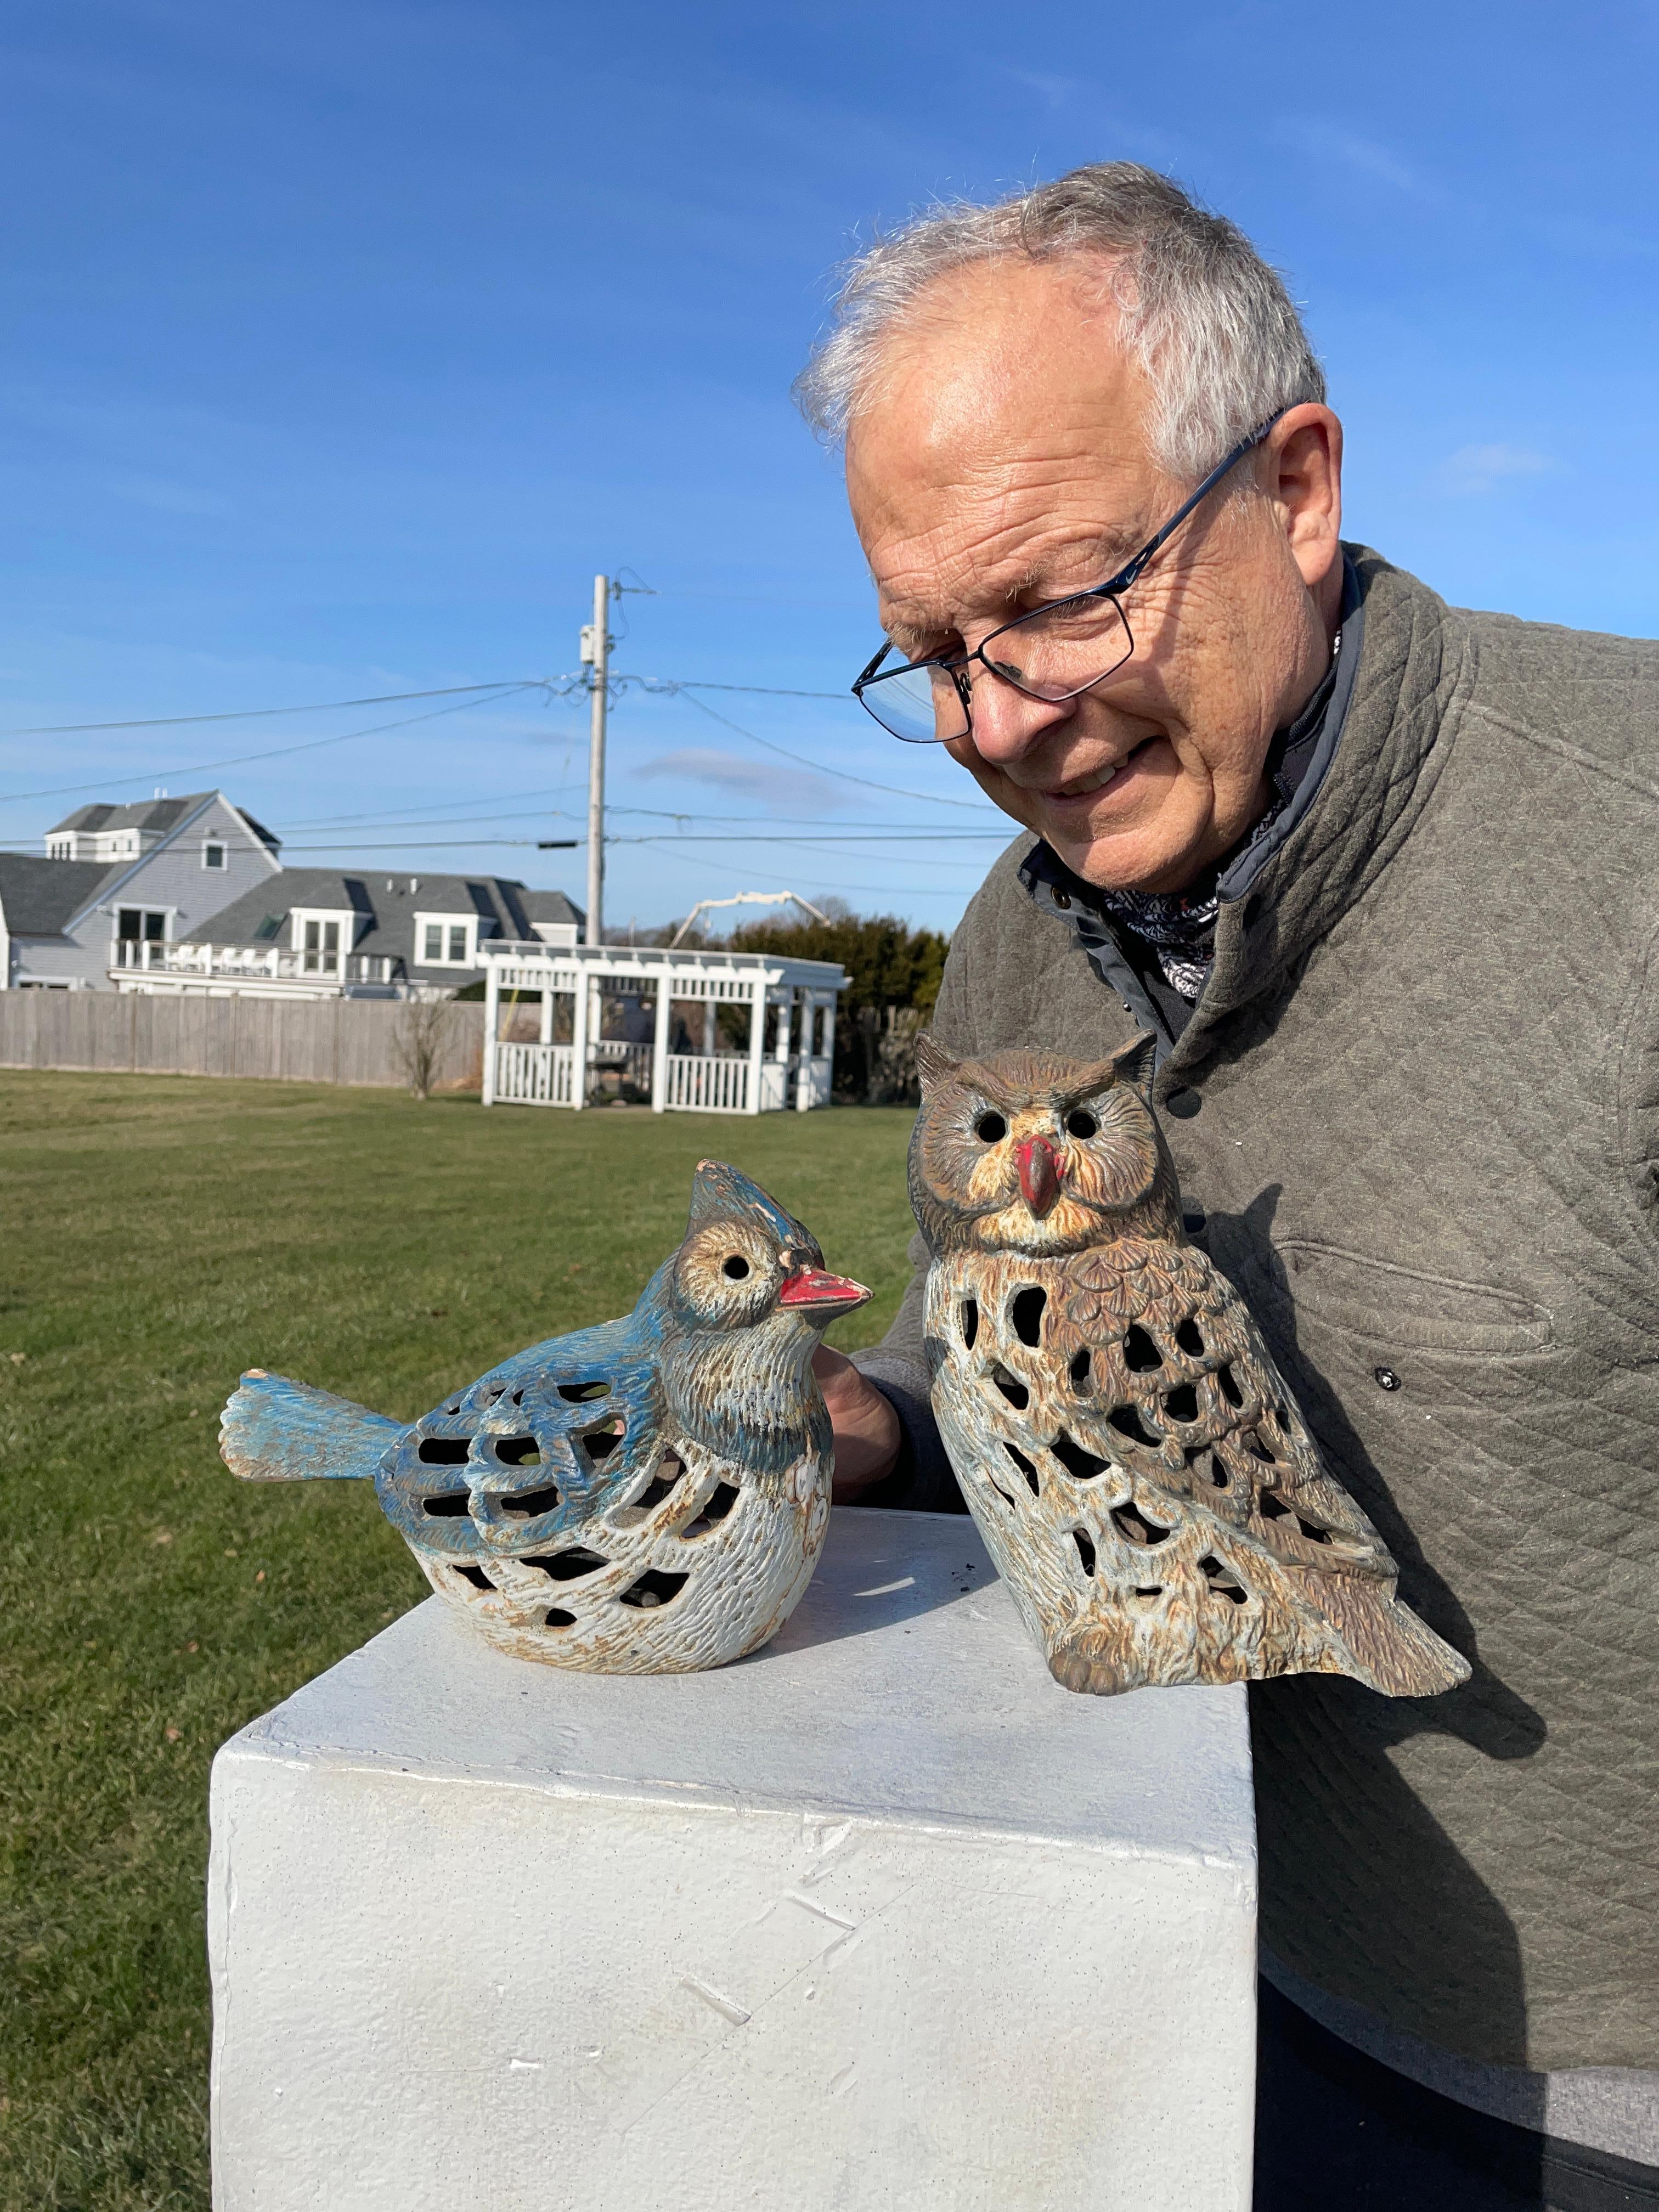 Original Hand painted Pair from our recent Japanese acquisitions

A pair (2) of wonderful large scale owl and a companion blue bird- both hard to find original lanterns and ...... 

just look at them sparkle at night !

These rare lanterns were